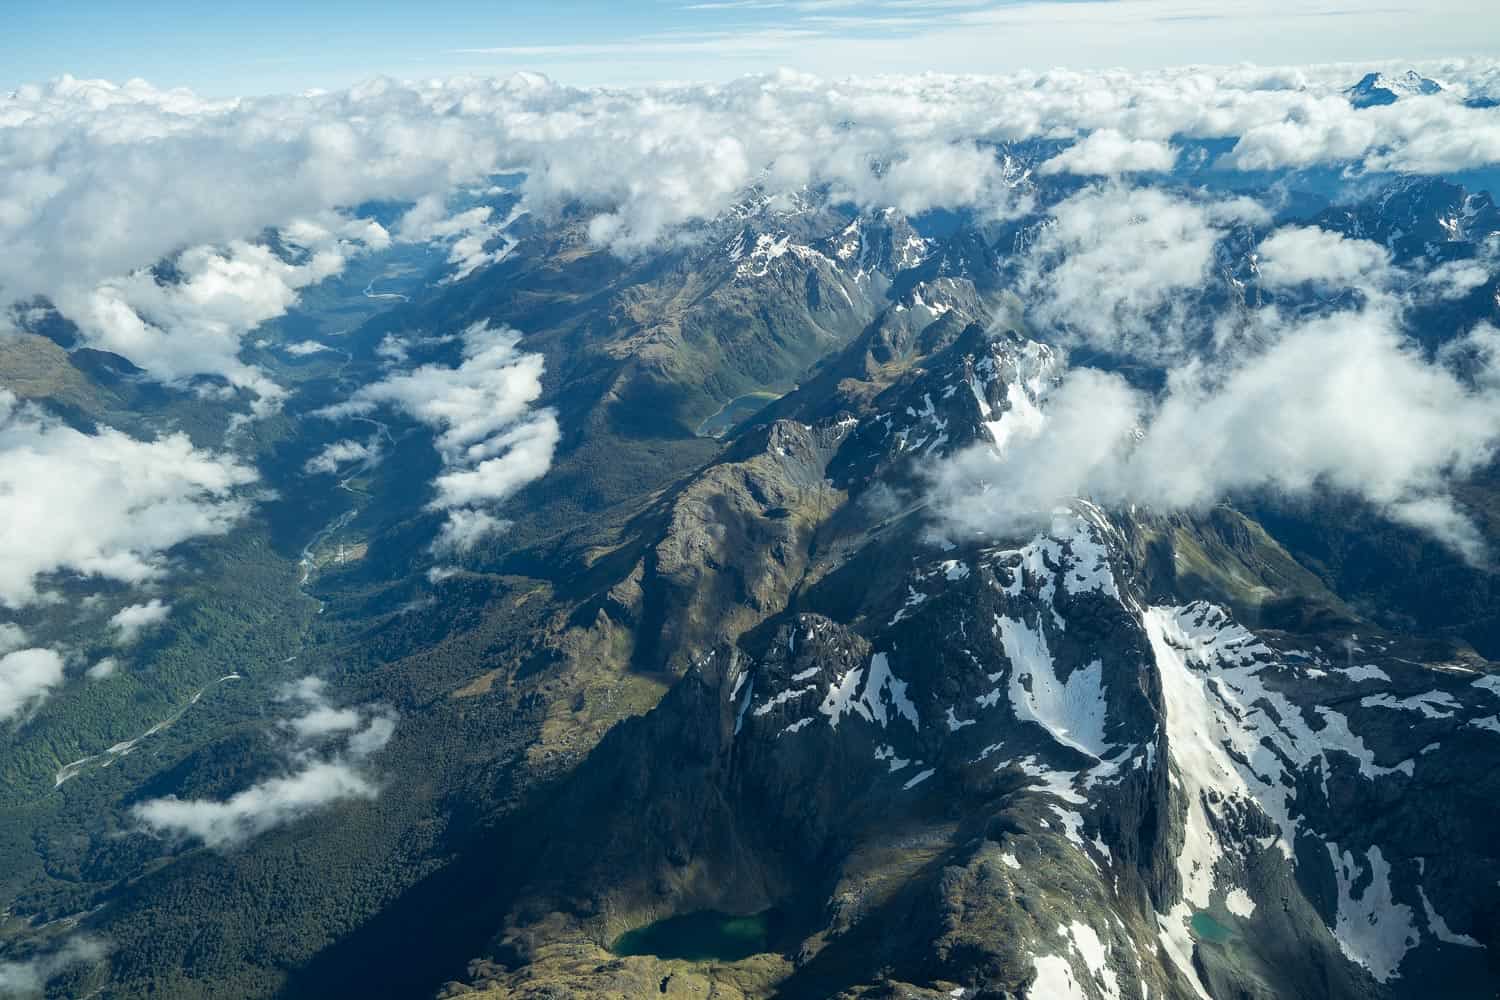 Southern Alps on a scenic flight from Queenstown to Milford Sound